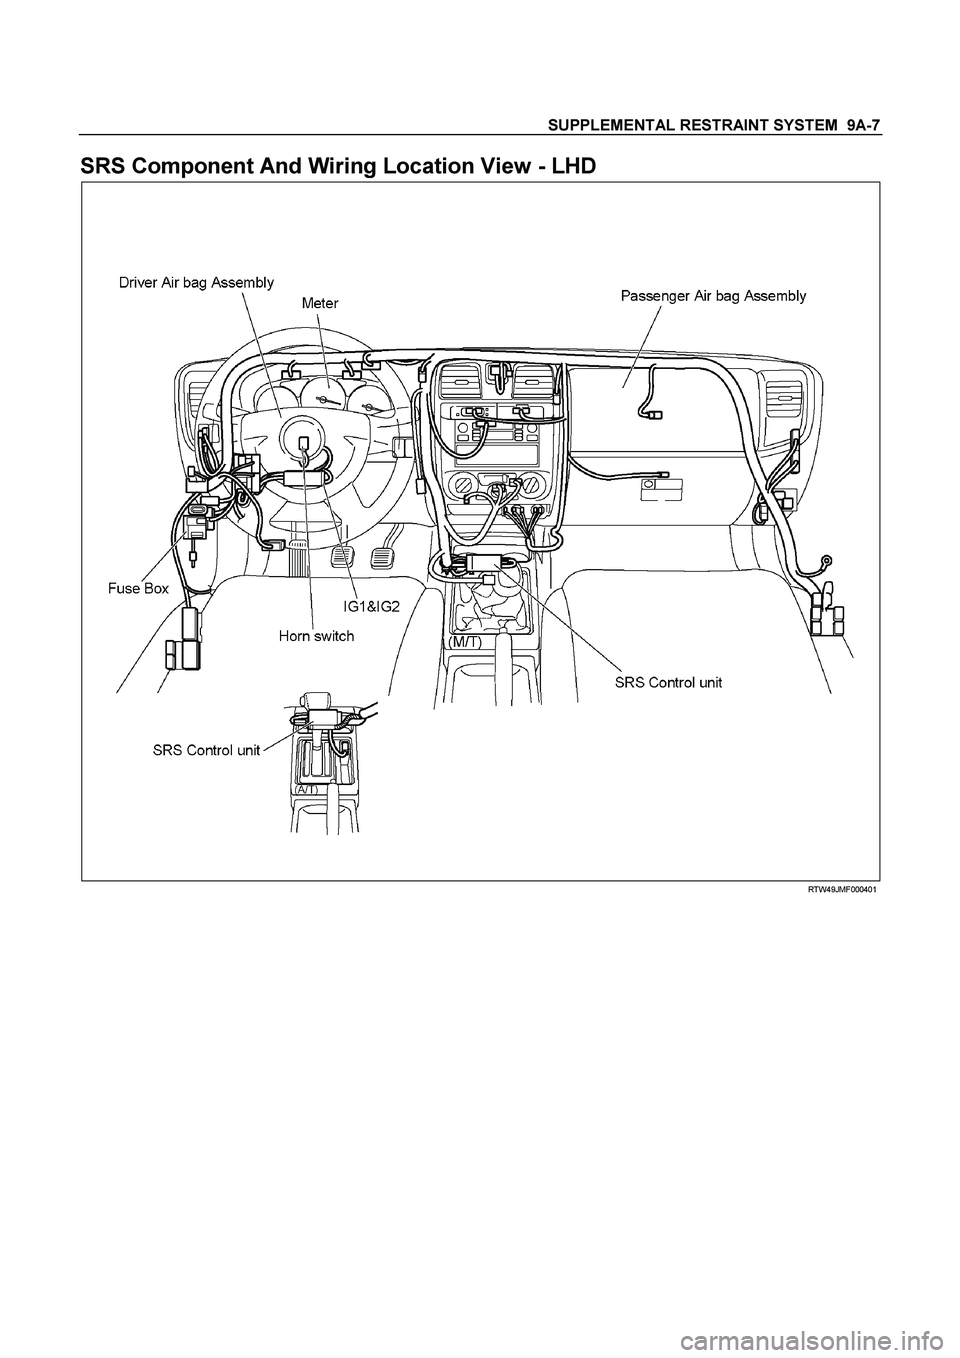 ISUZU TF SERIES 2004  Workshop Manual SUPPLEMENTAL RESTRAINT SYSTEM  9A-7
 
SRS Component And Wiring Location View - LHD 
  
 
 
 
 
 
 RTW49JMF000401  